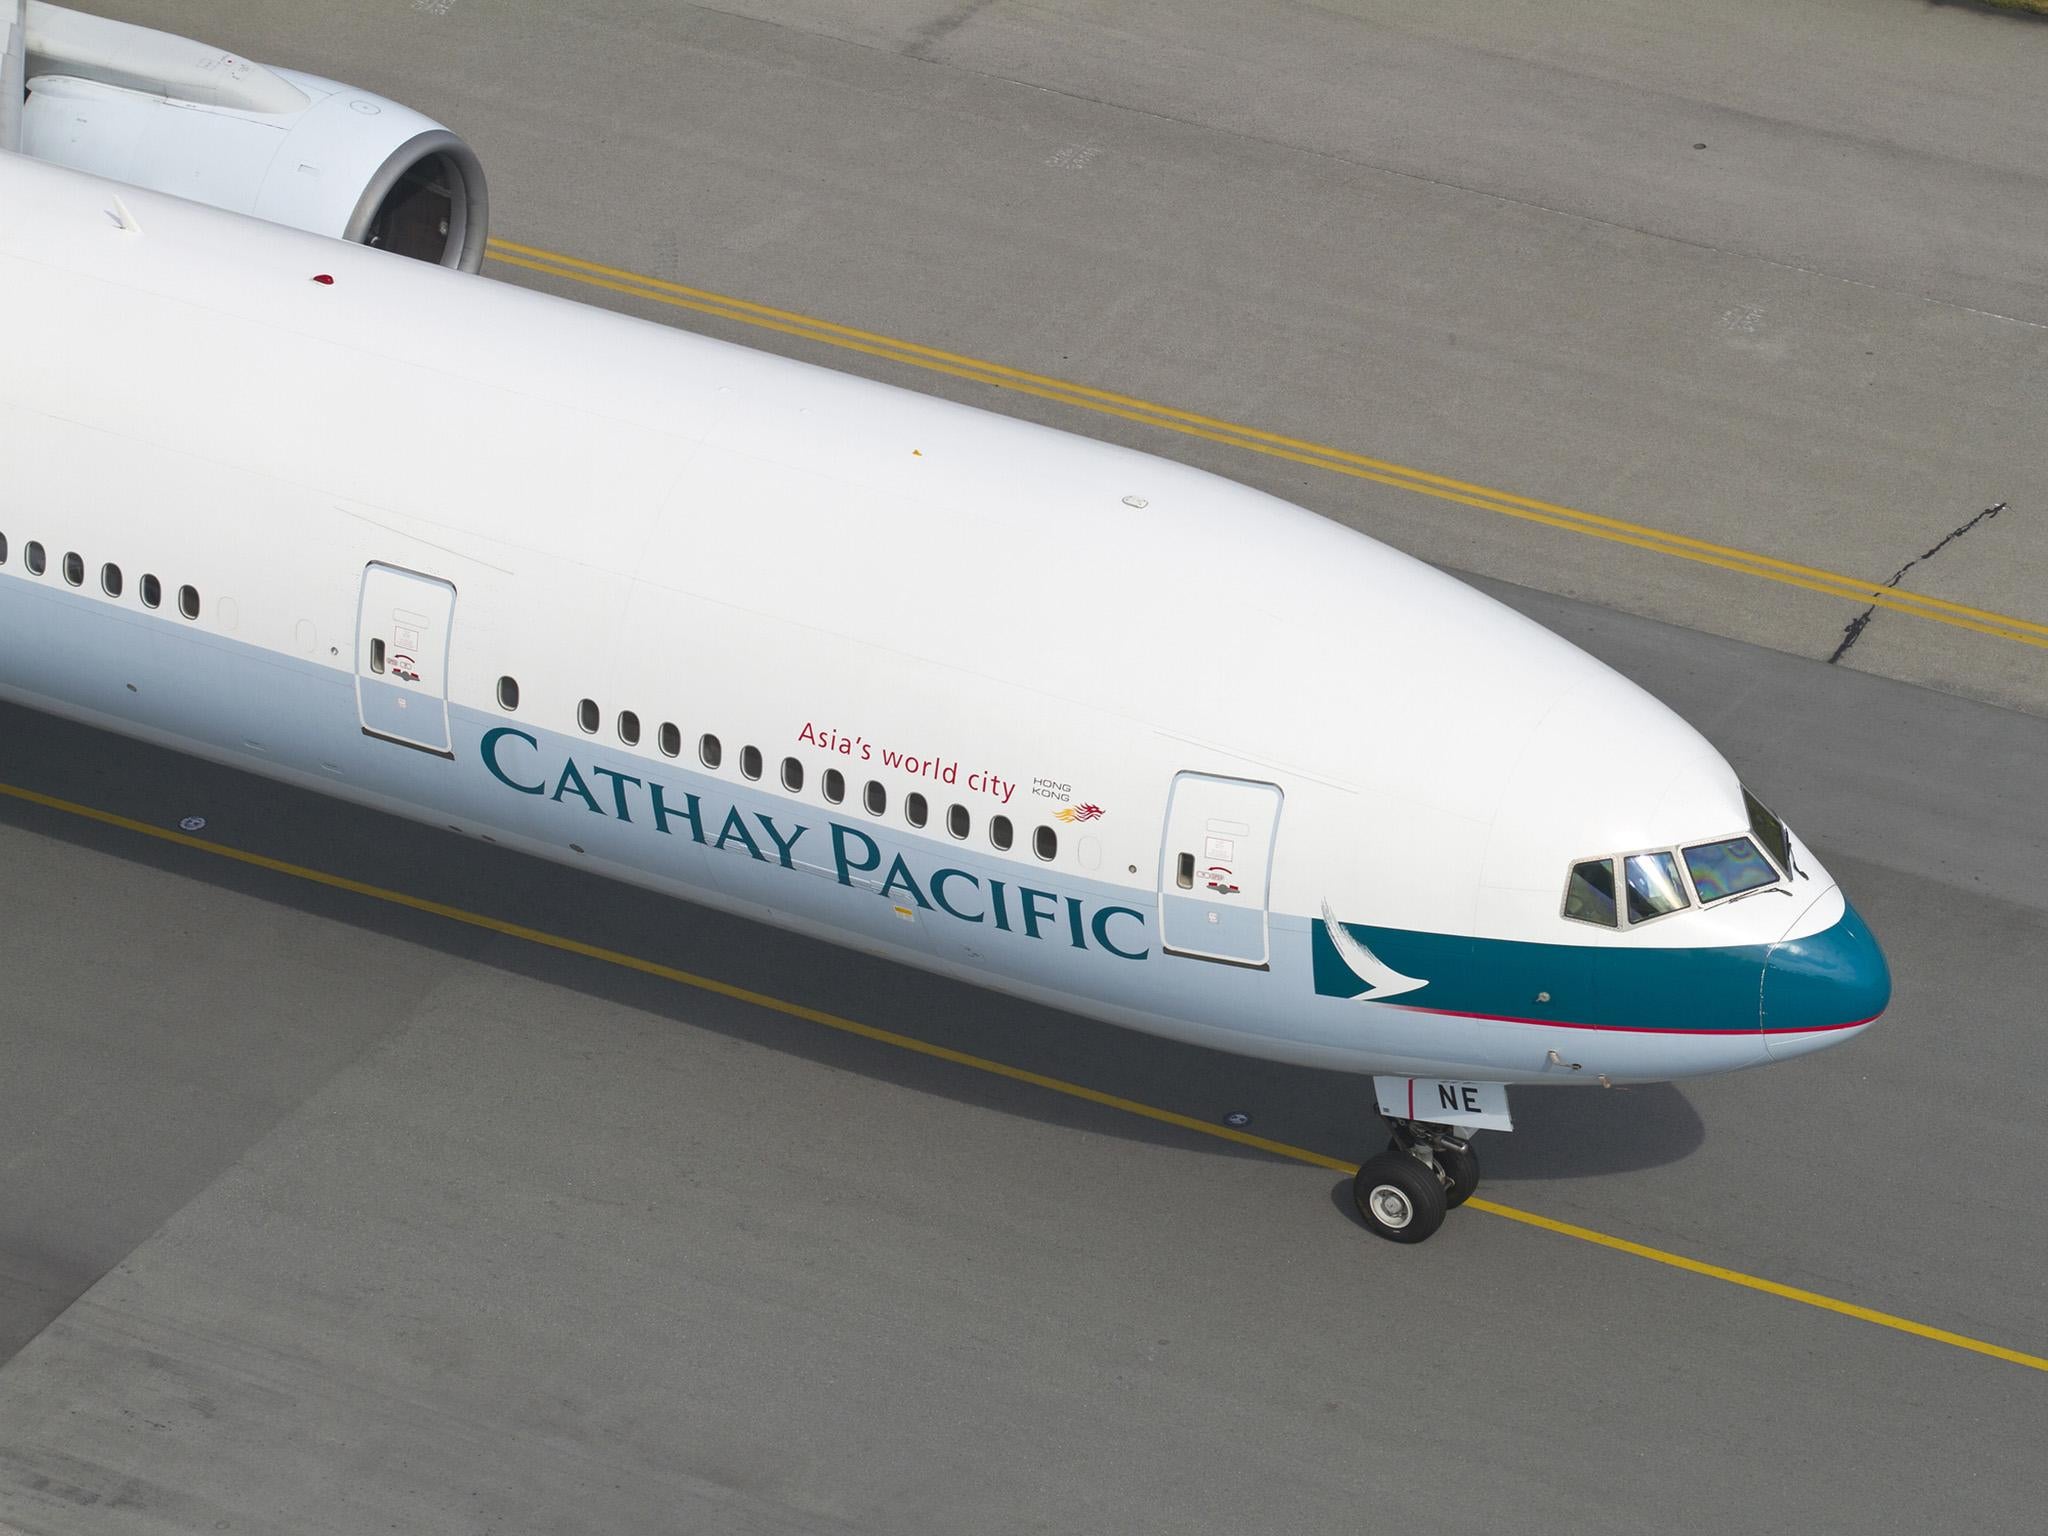 The CEO of Cathay Pacific has stepped down